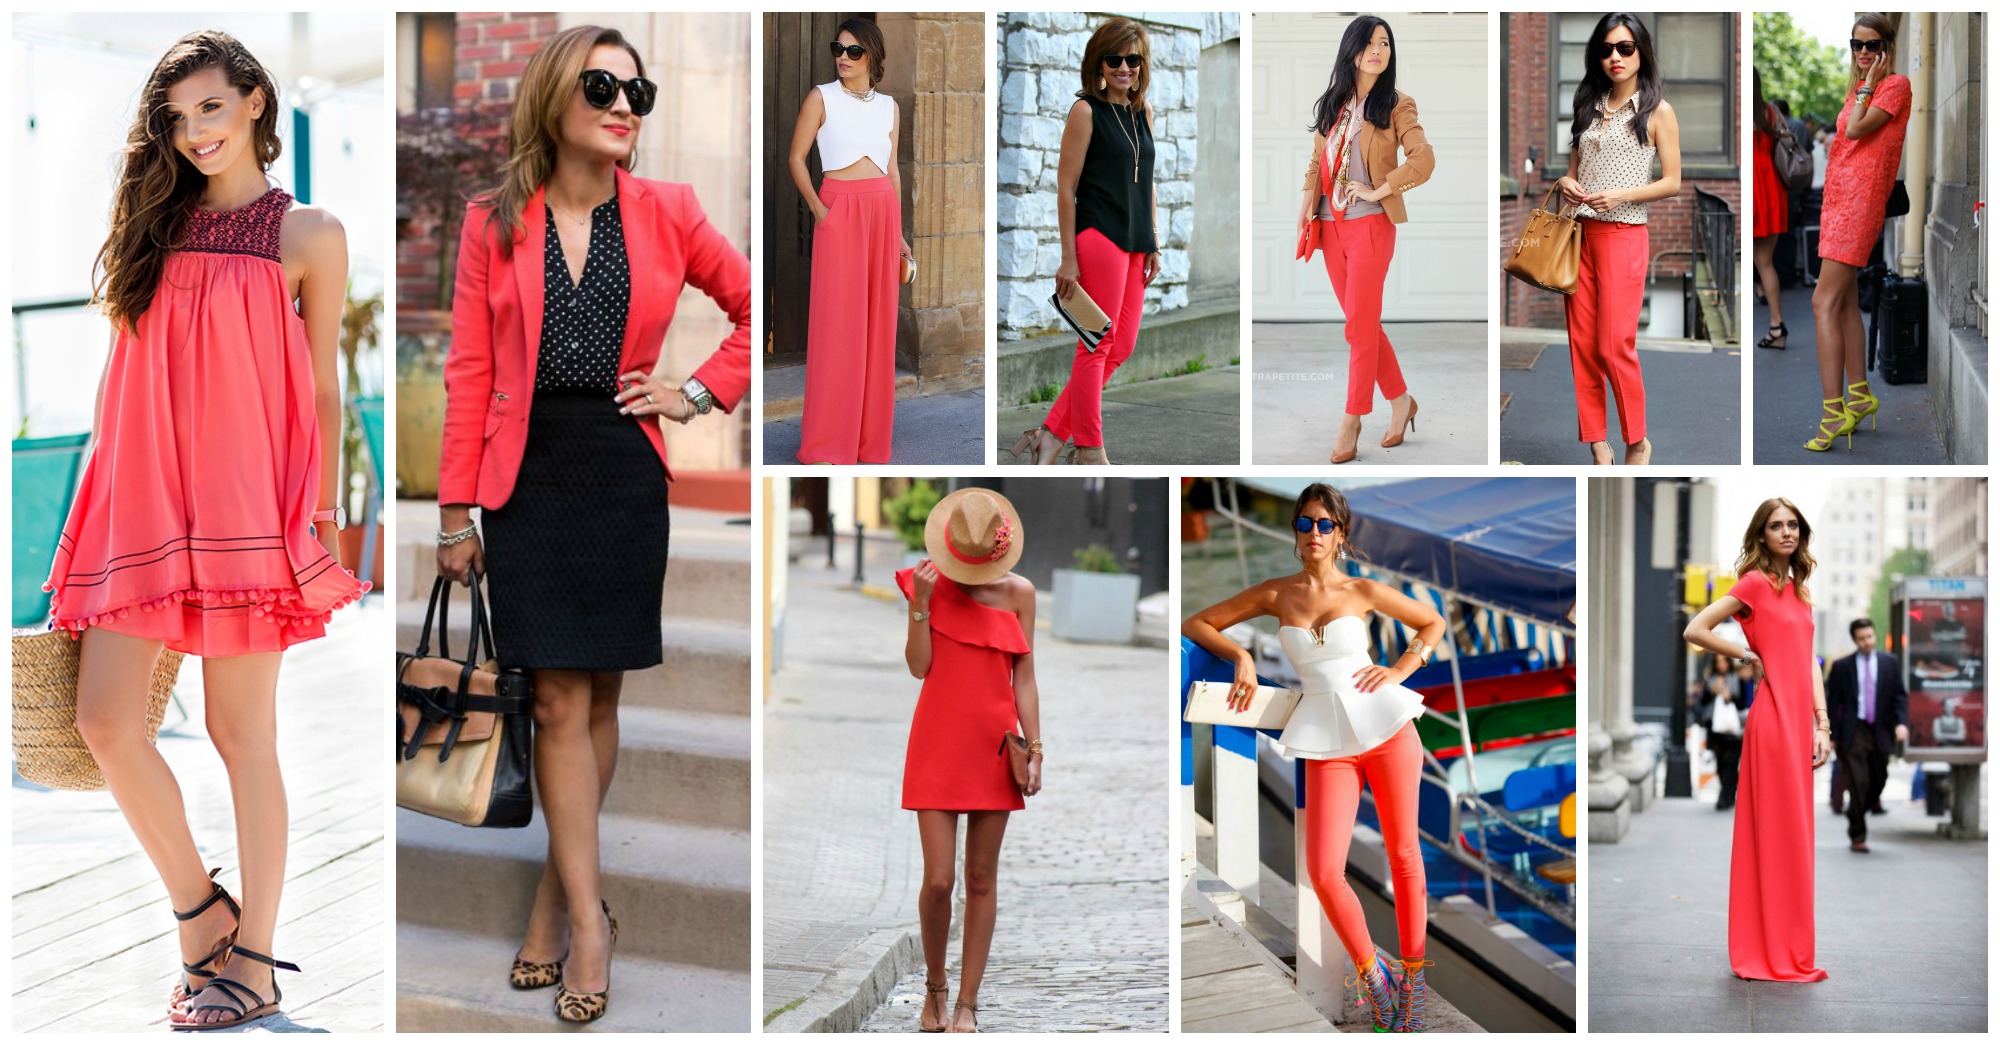 15 Amazing Ways to Wear Coral This Season and Look Fabulous